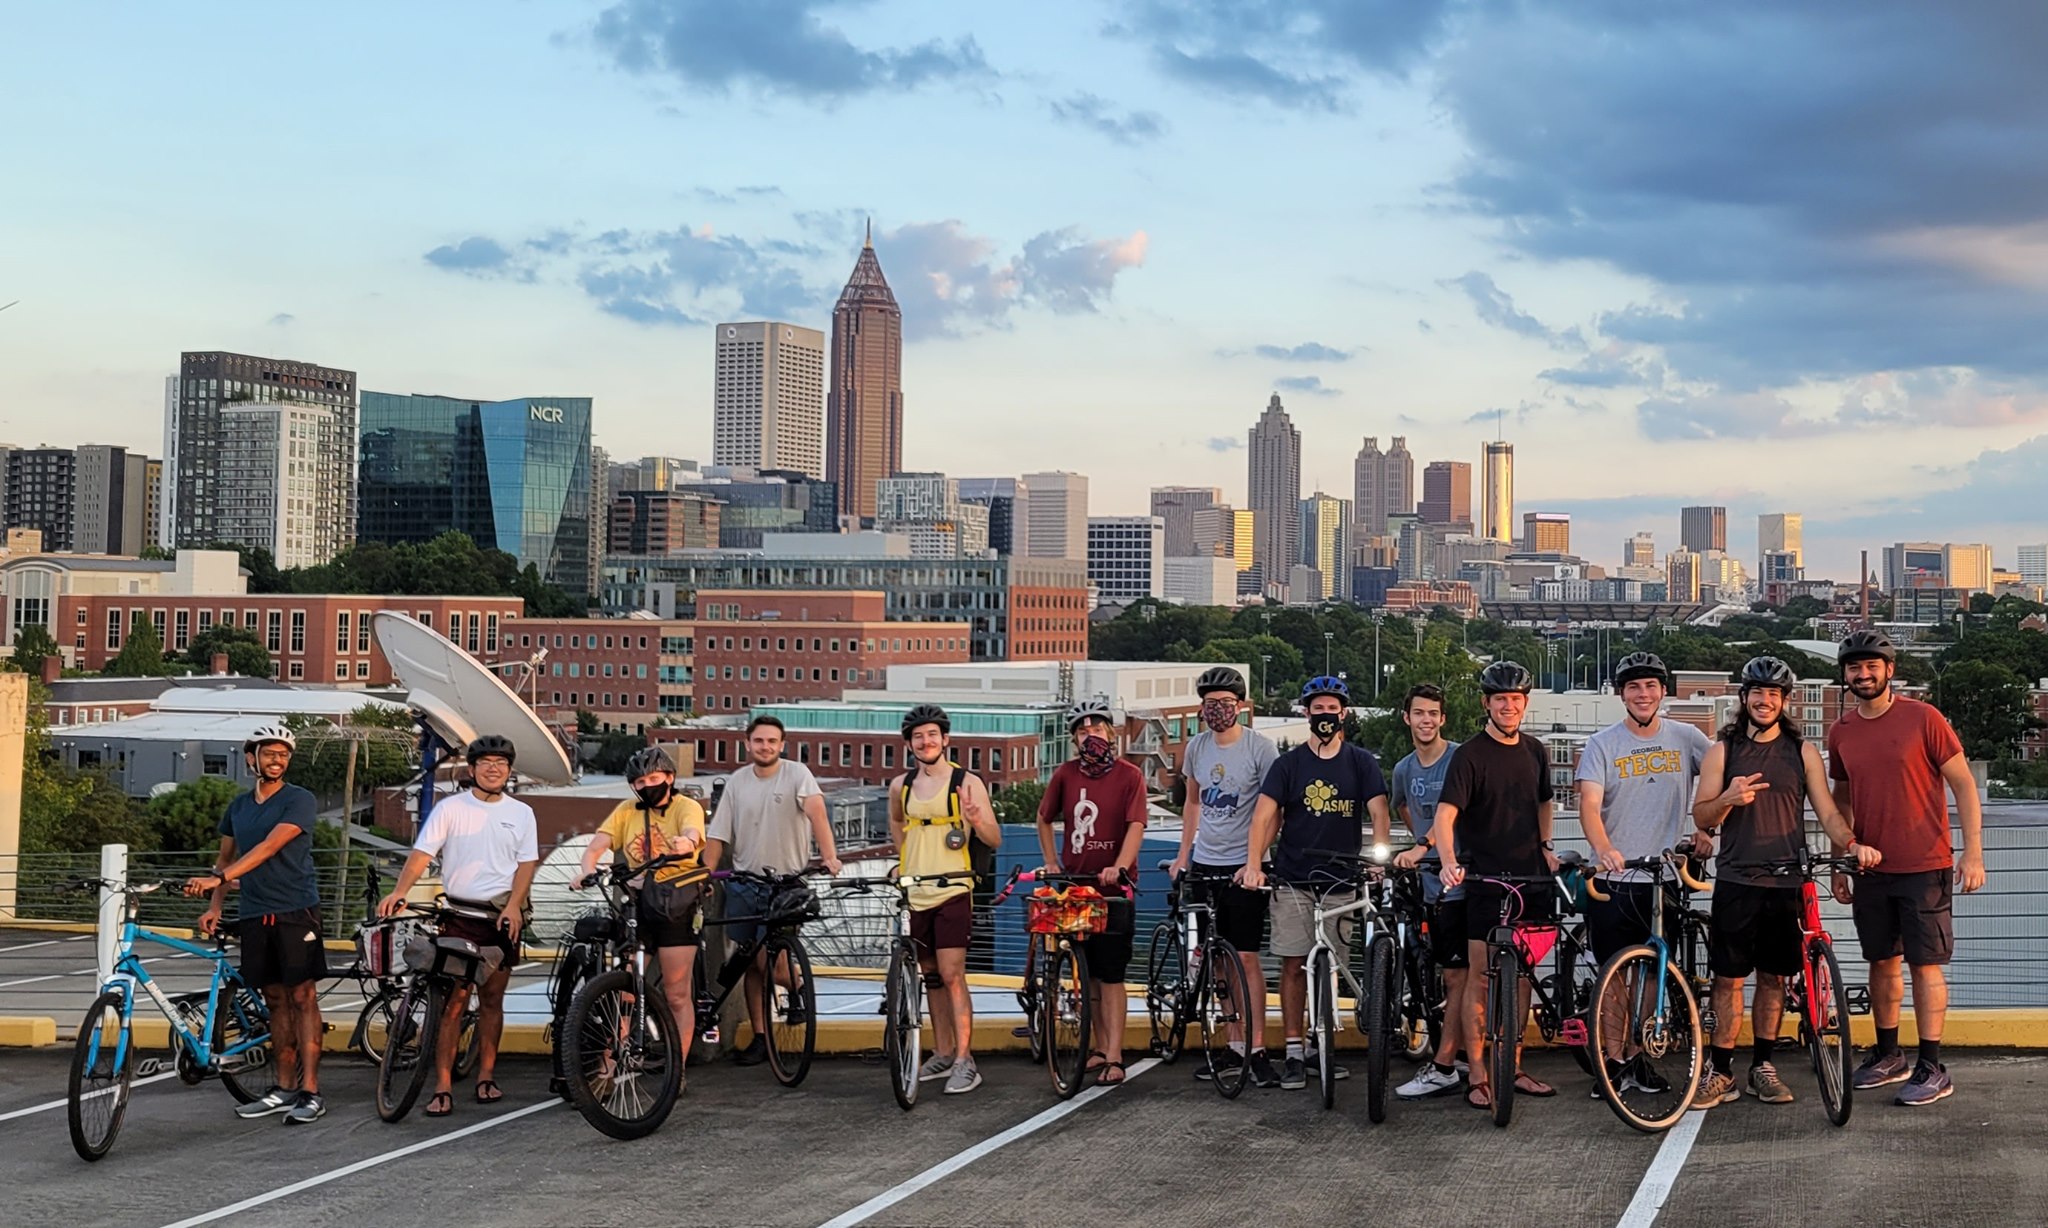 A Starter Bikes community ride took place earlier this month.